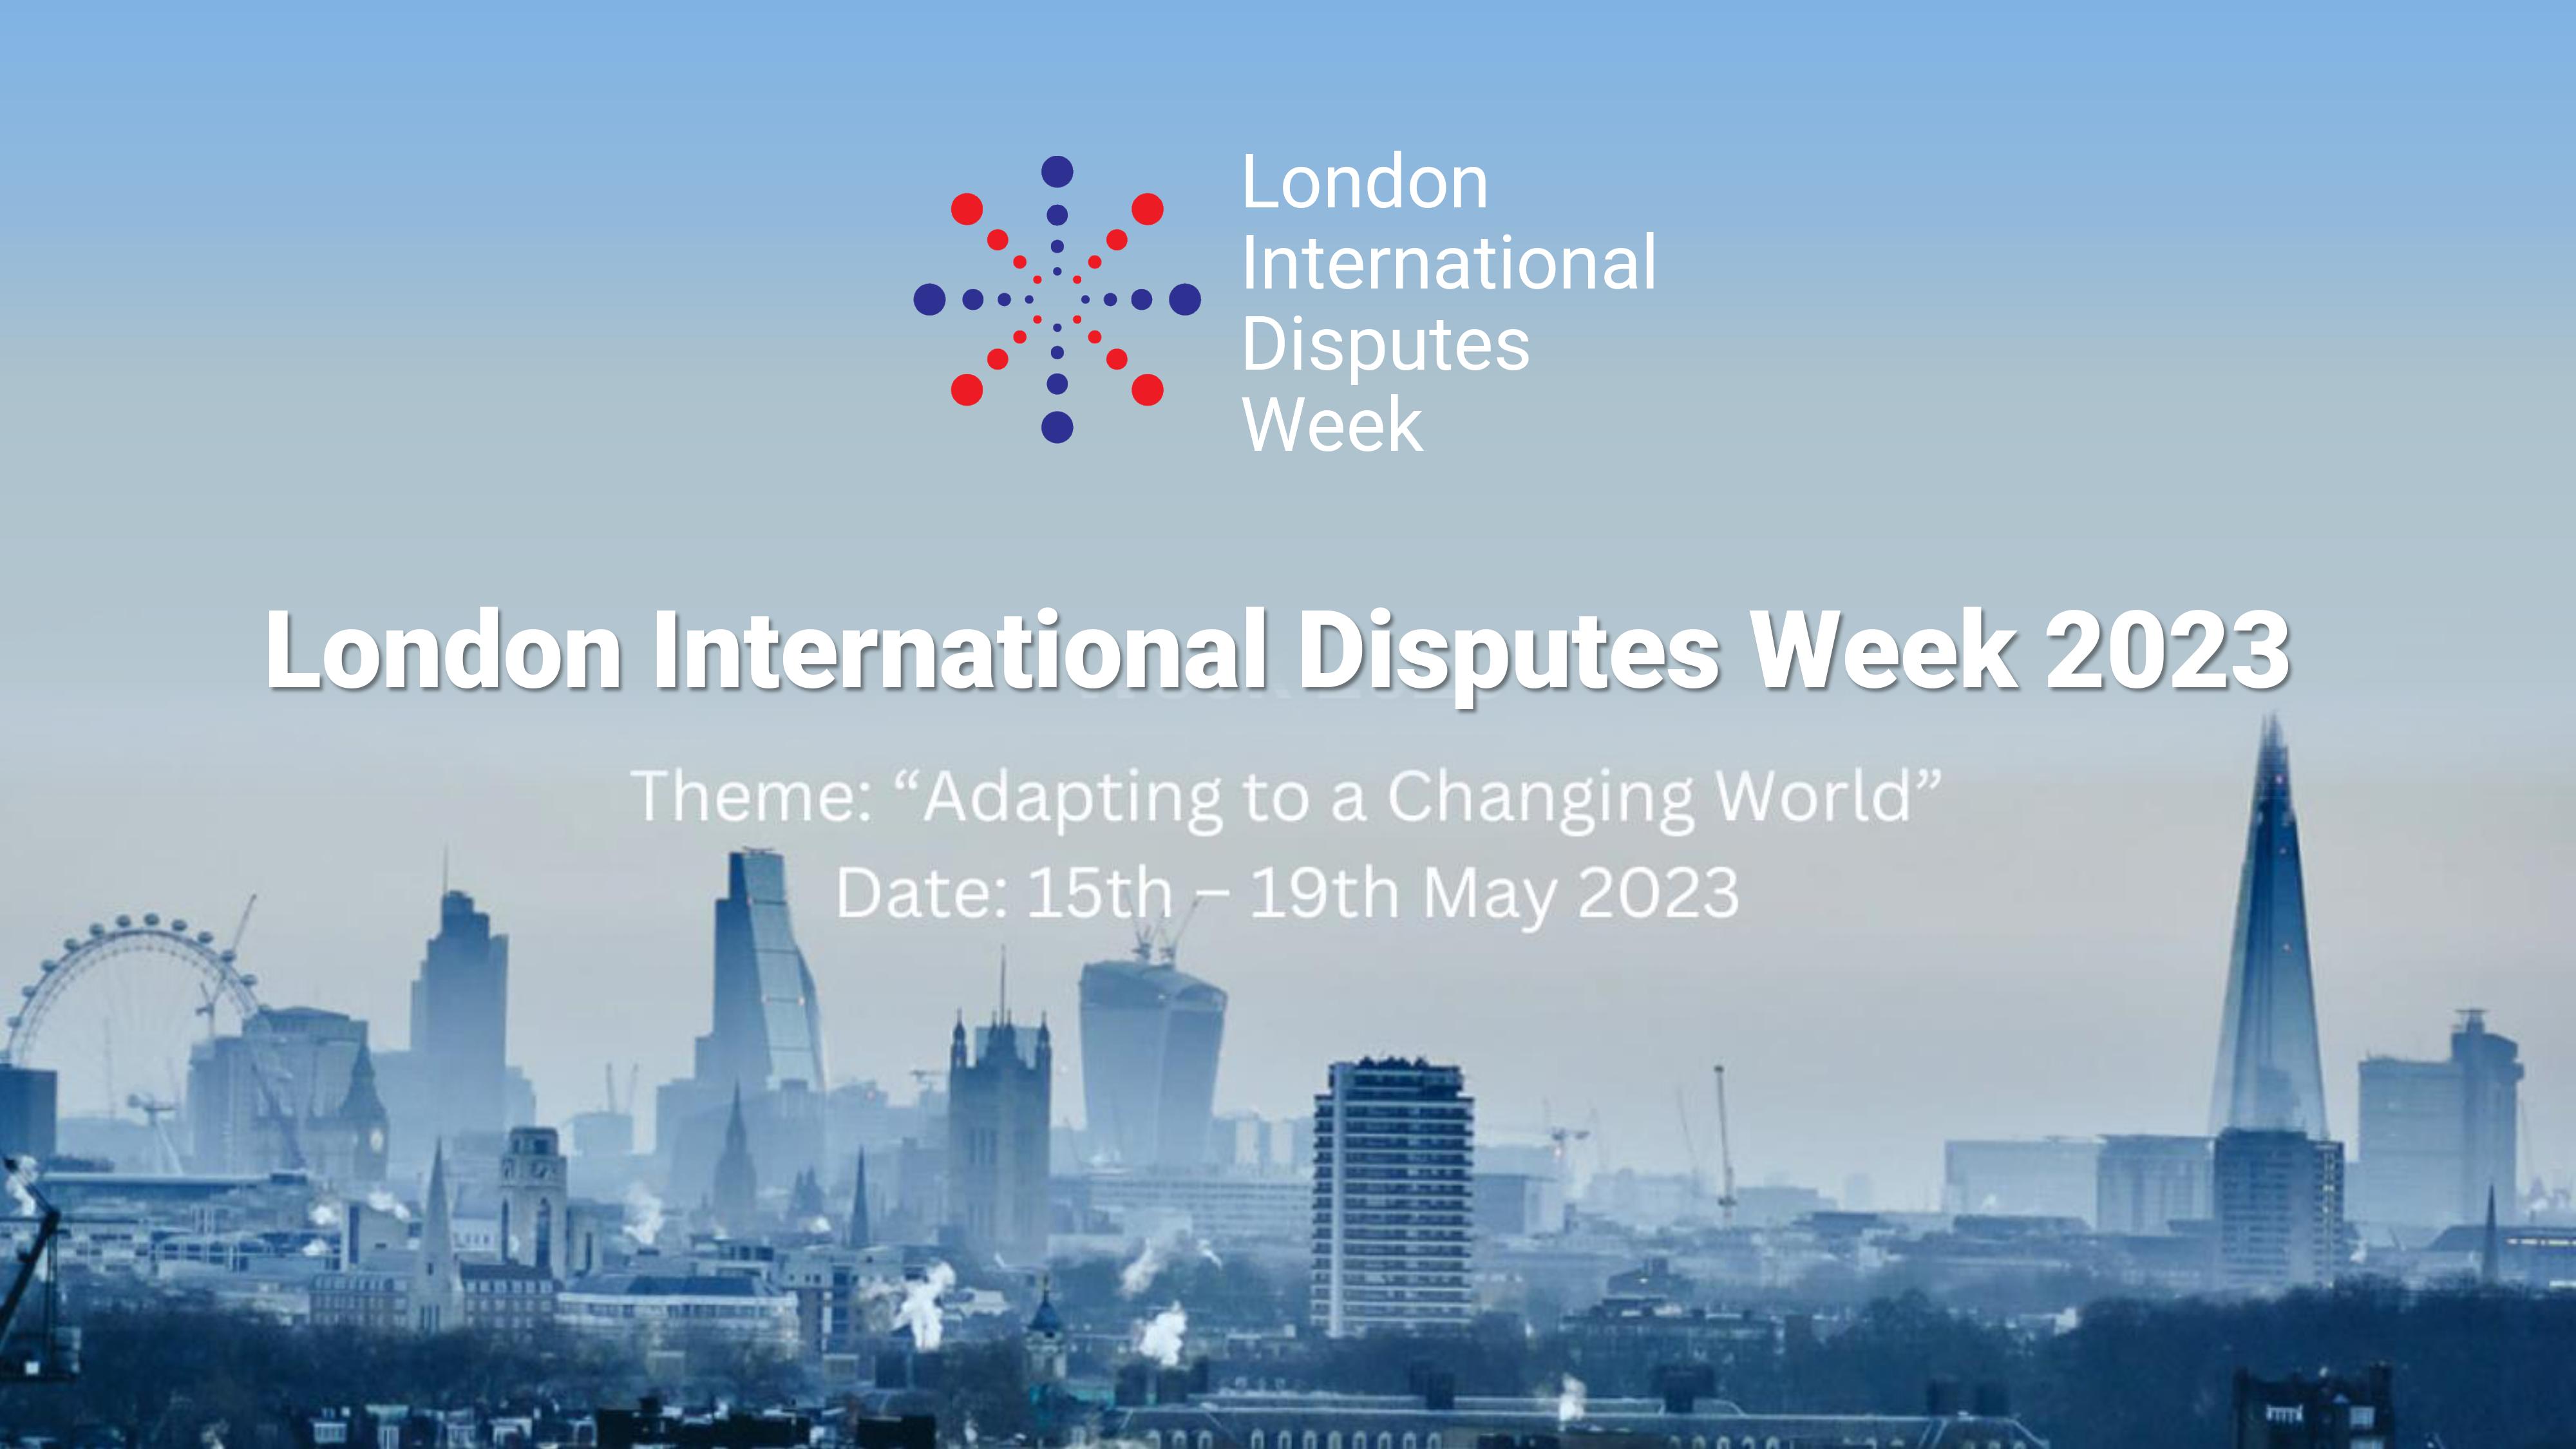 [VIAC Supported Events] London International Disputes Week 2023: Adapting to a changing world (LIDW 2023)